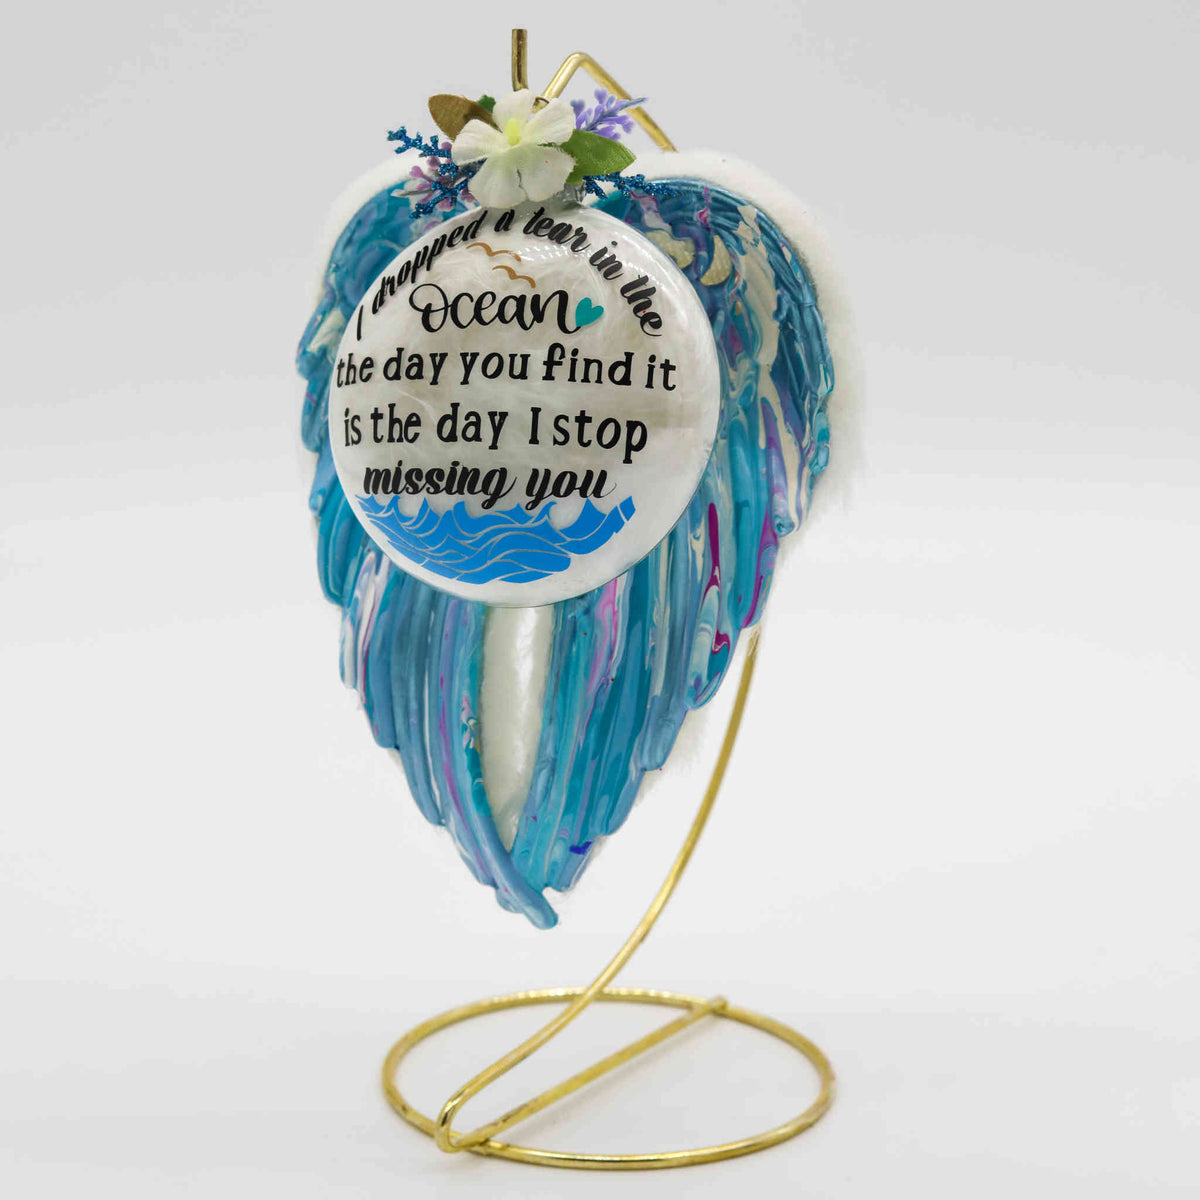 These poured acrylic ornaments are made in a variety of colors with custom verses, and adorned with feathers, fur, charms, flowers, or other decorative elements dependent on your selection.